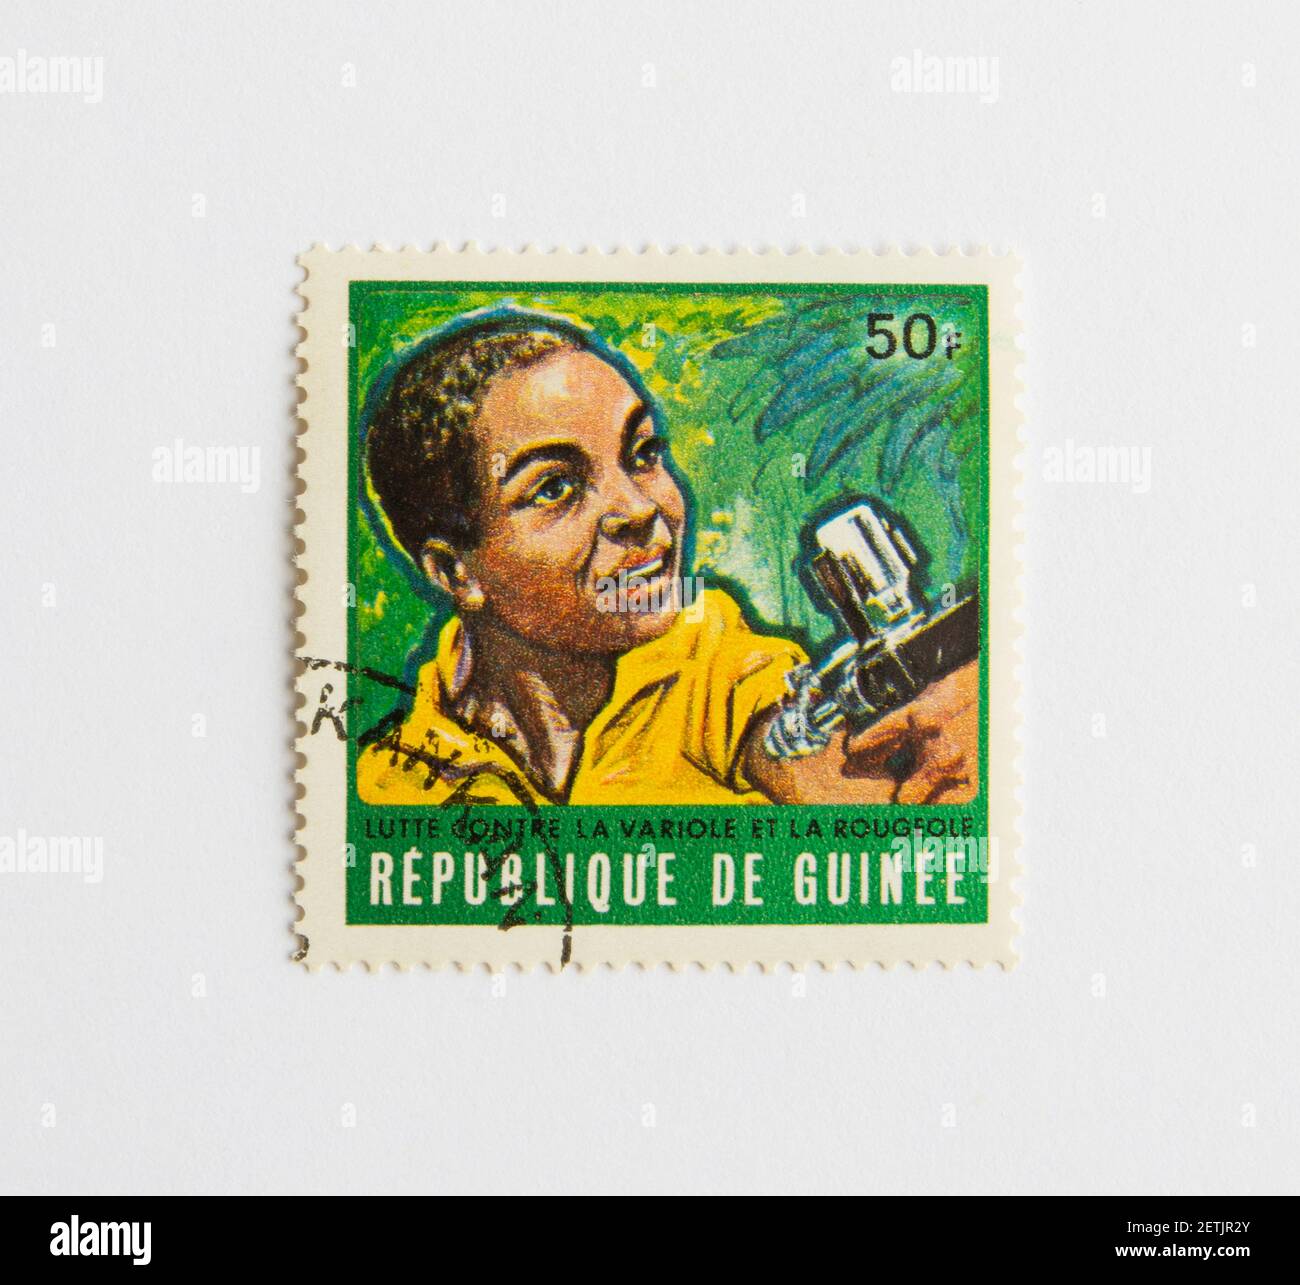 01.03.2021 Istanbul Turkey. Guinea Republic Postage Stamp. circa 1972. The fight for measles and smallpox control. vaccination boy Stock Photo